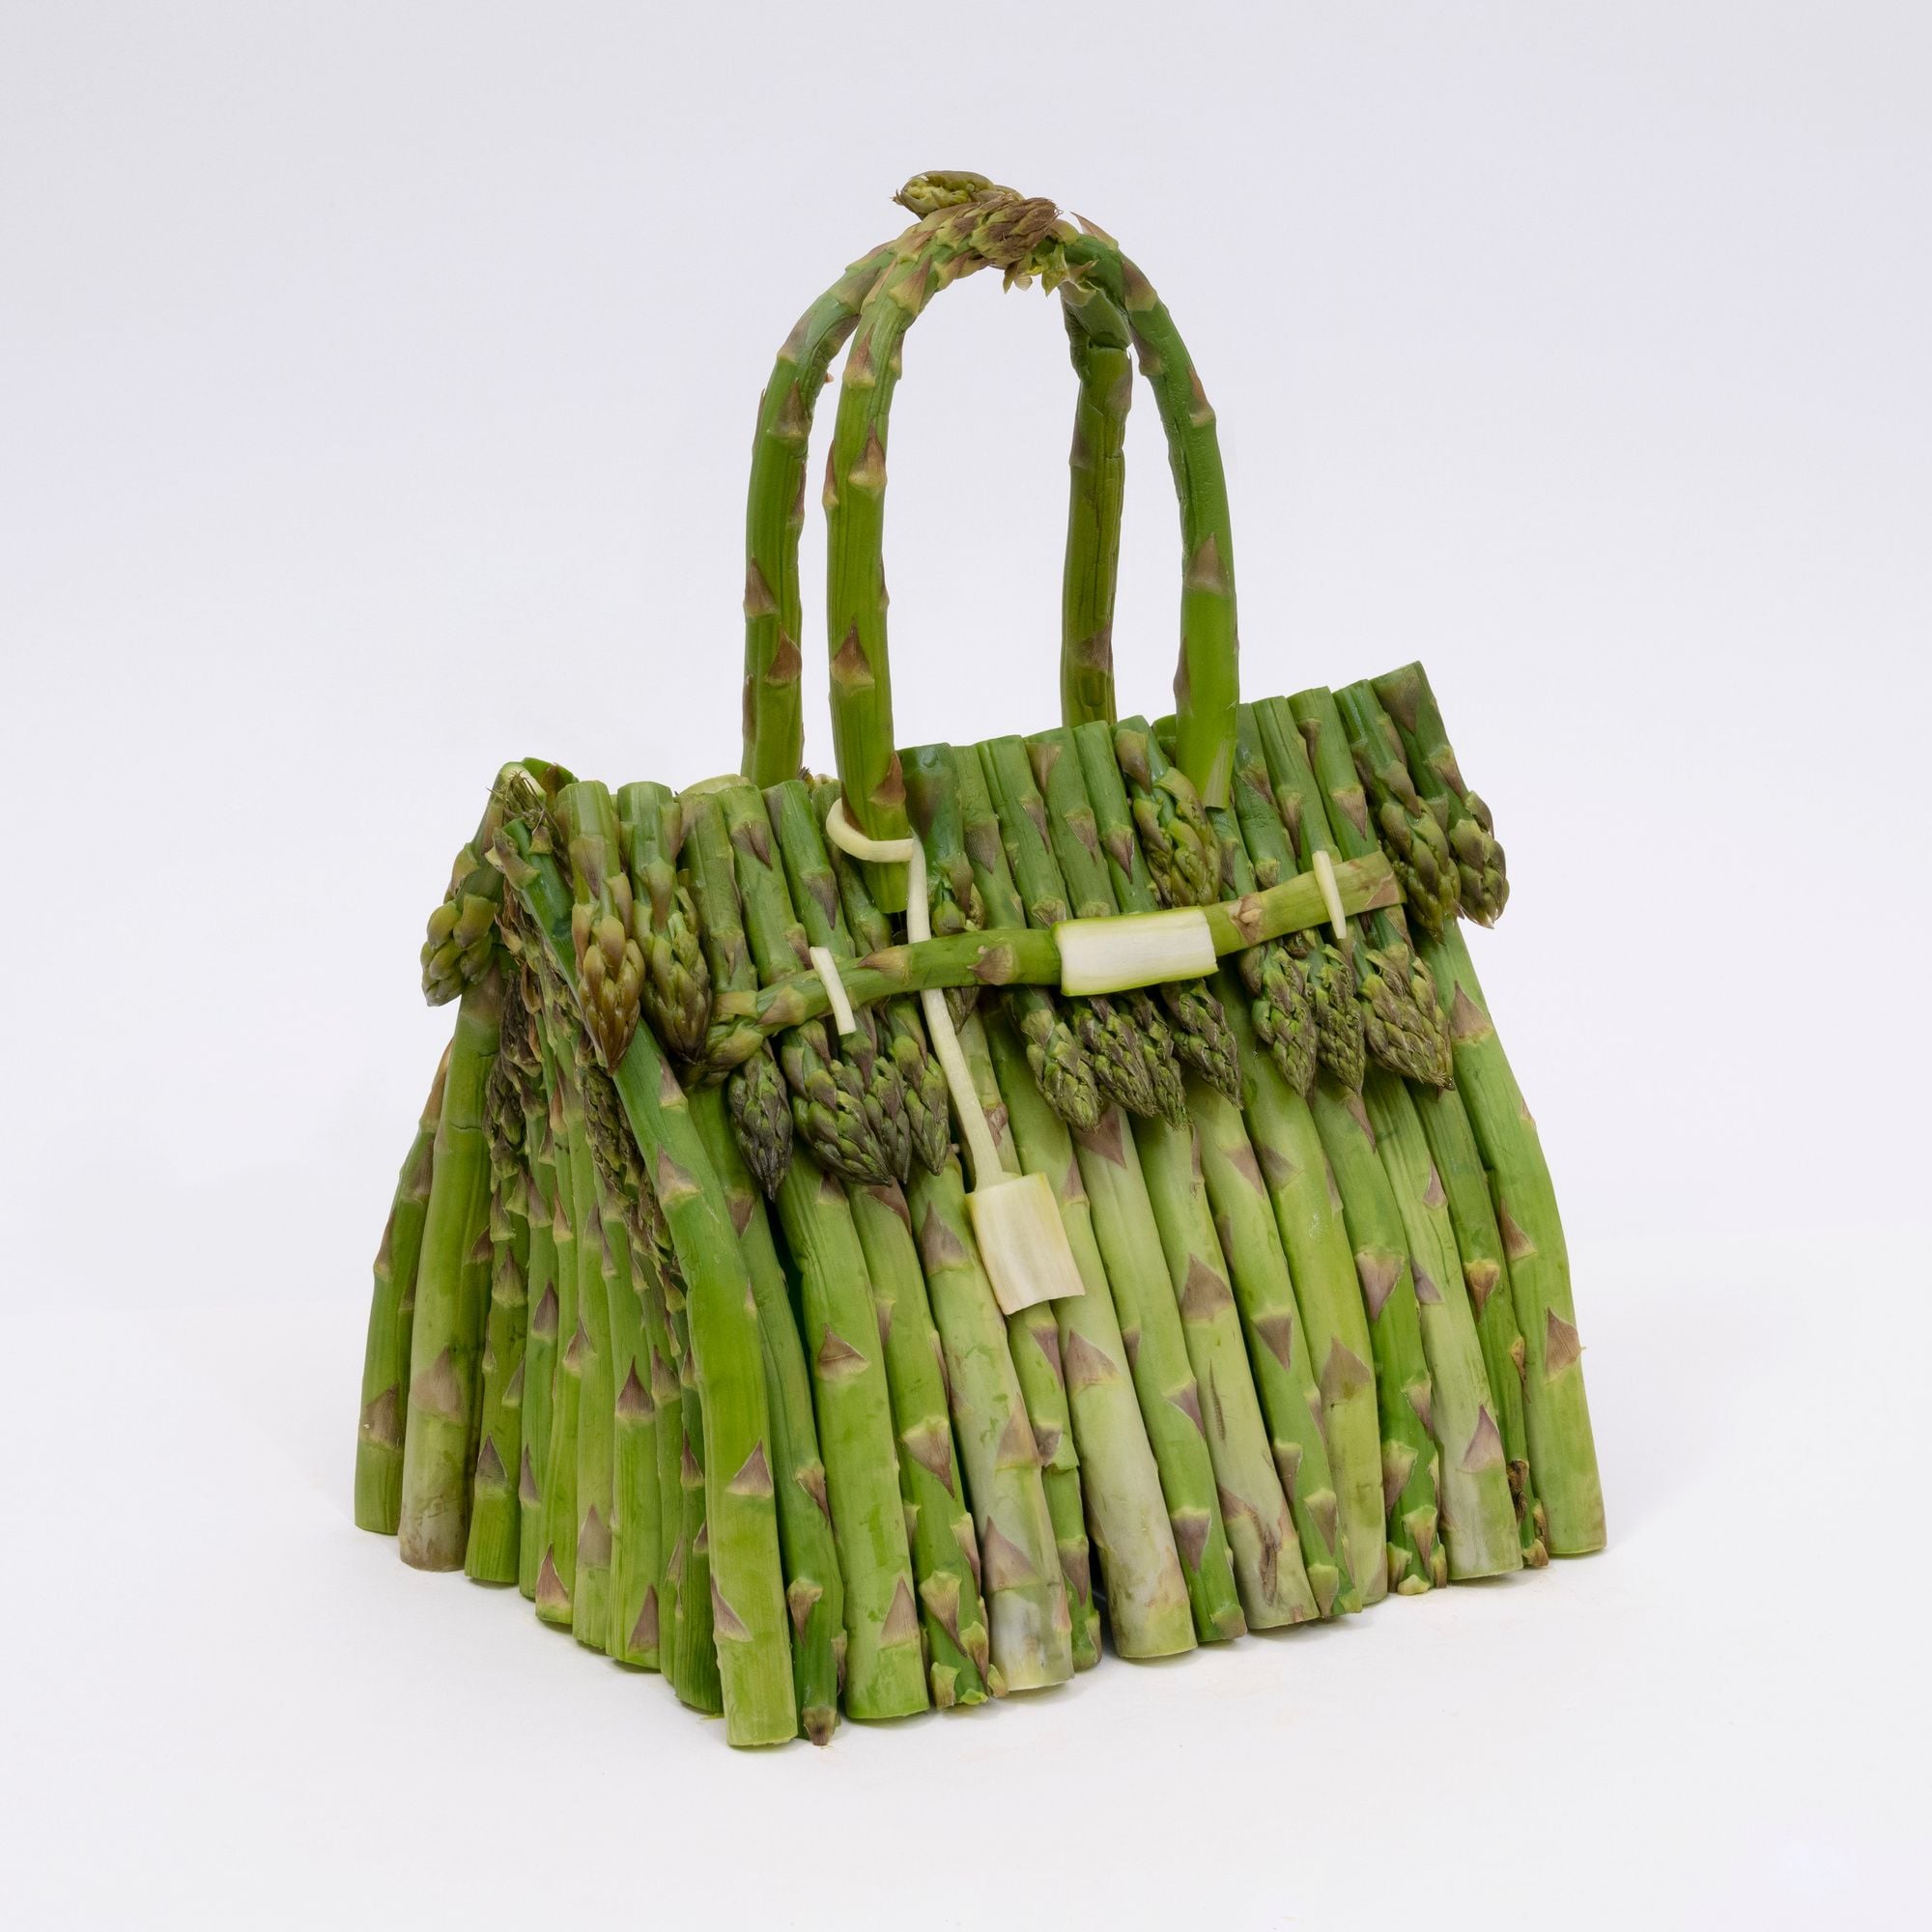 An all-asparagus version of luxury fashion brand Hermes' iconic 